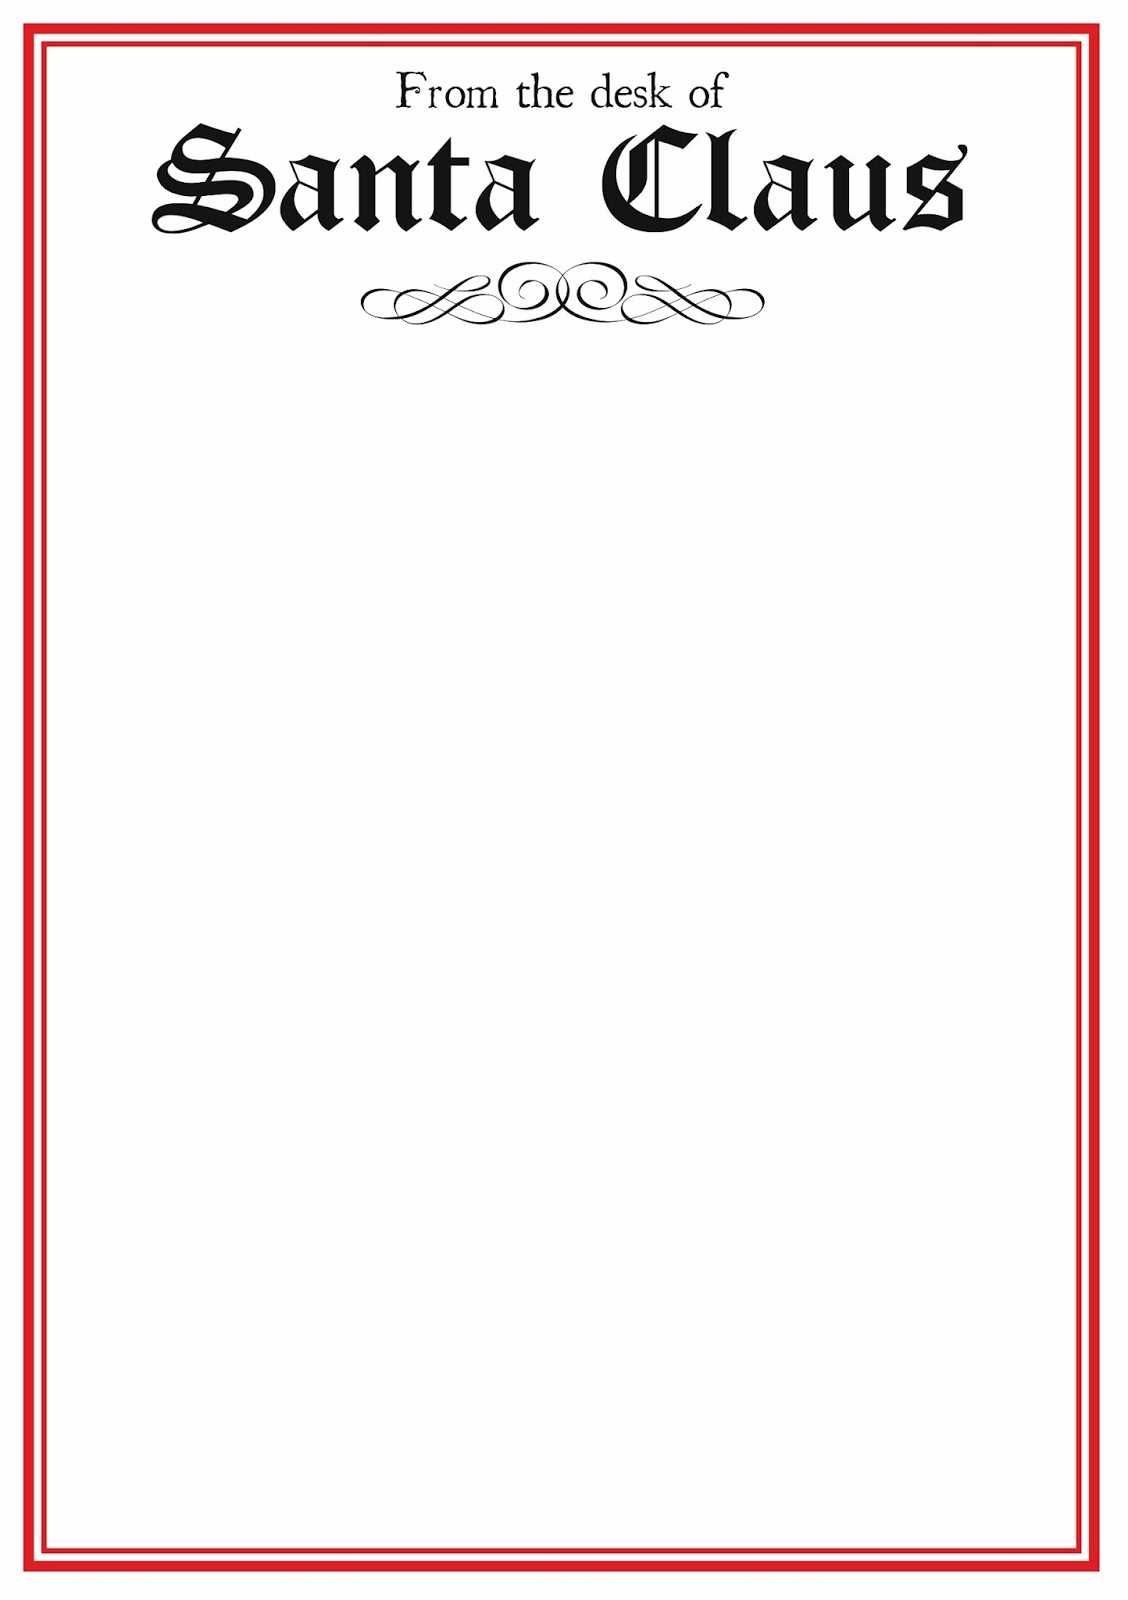 Free Letter From Santa Word Template - Milas Inside Blank Letter From Santa Template